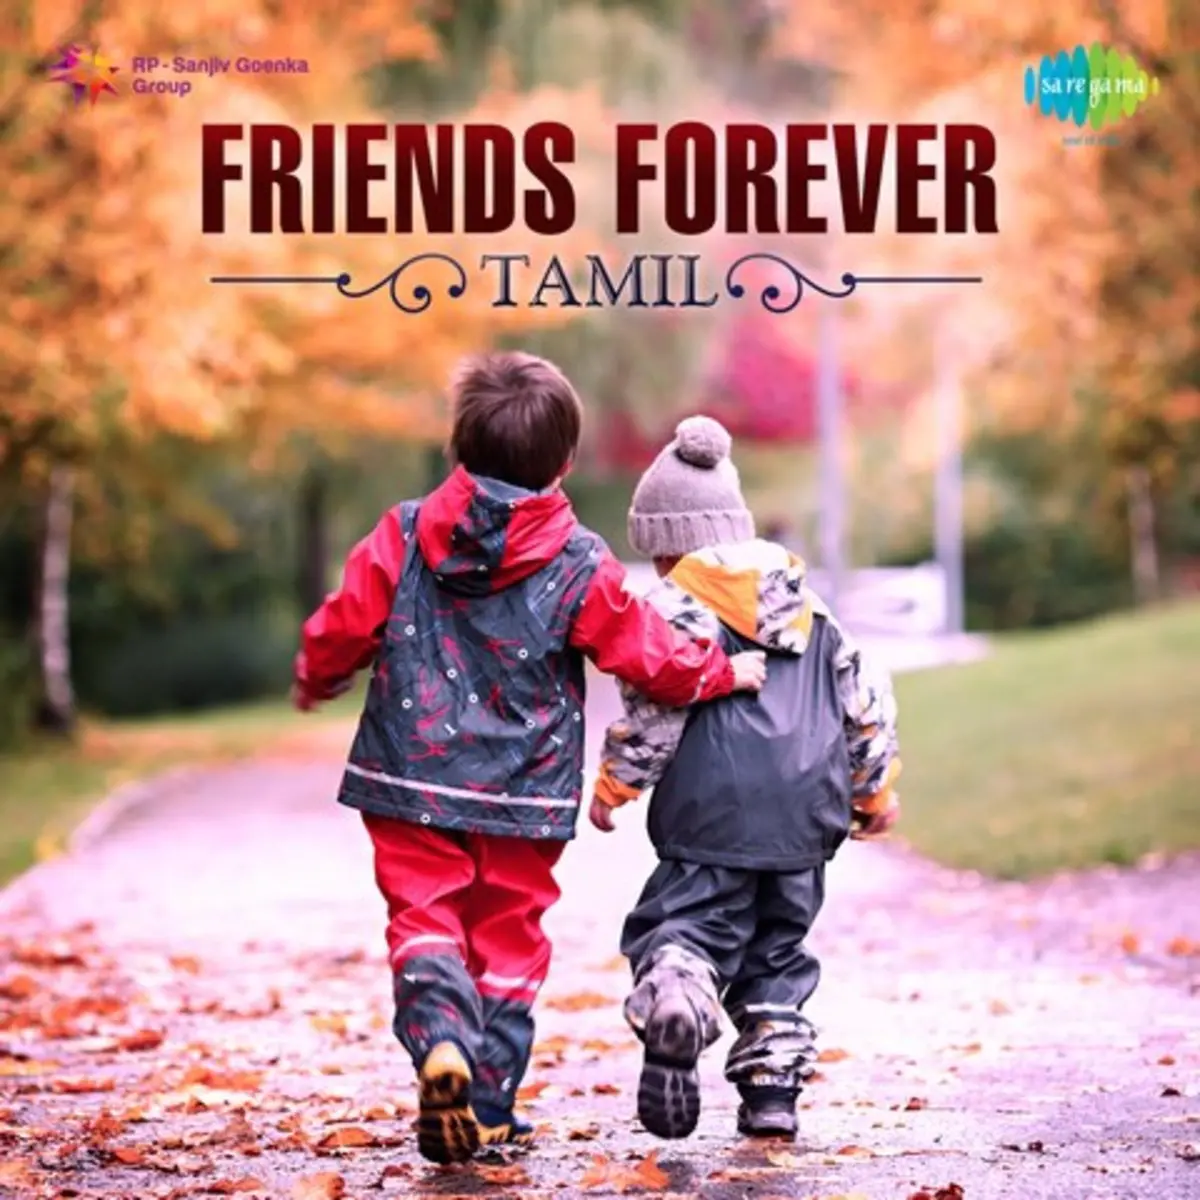 Friends Forever Tamil Songs Download Friends Forever Tamil Mp3 Tamil Songs Online Free On Gaana Com